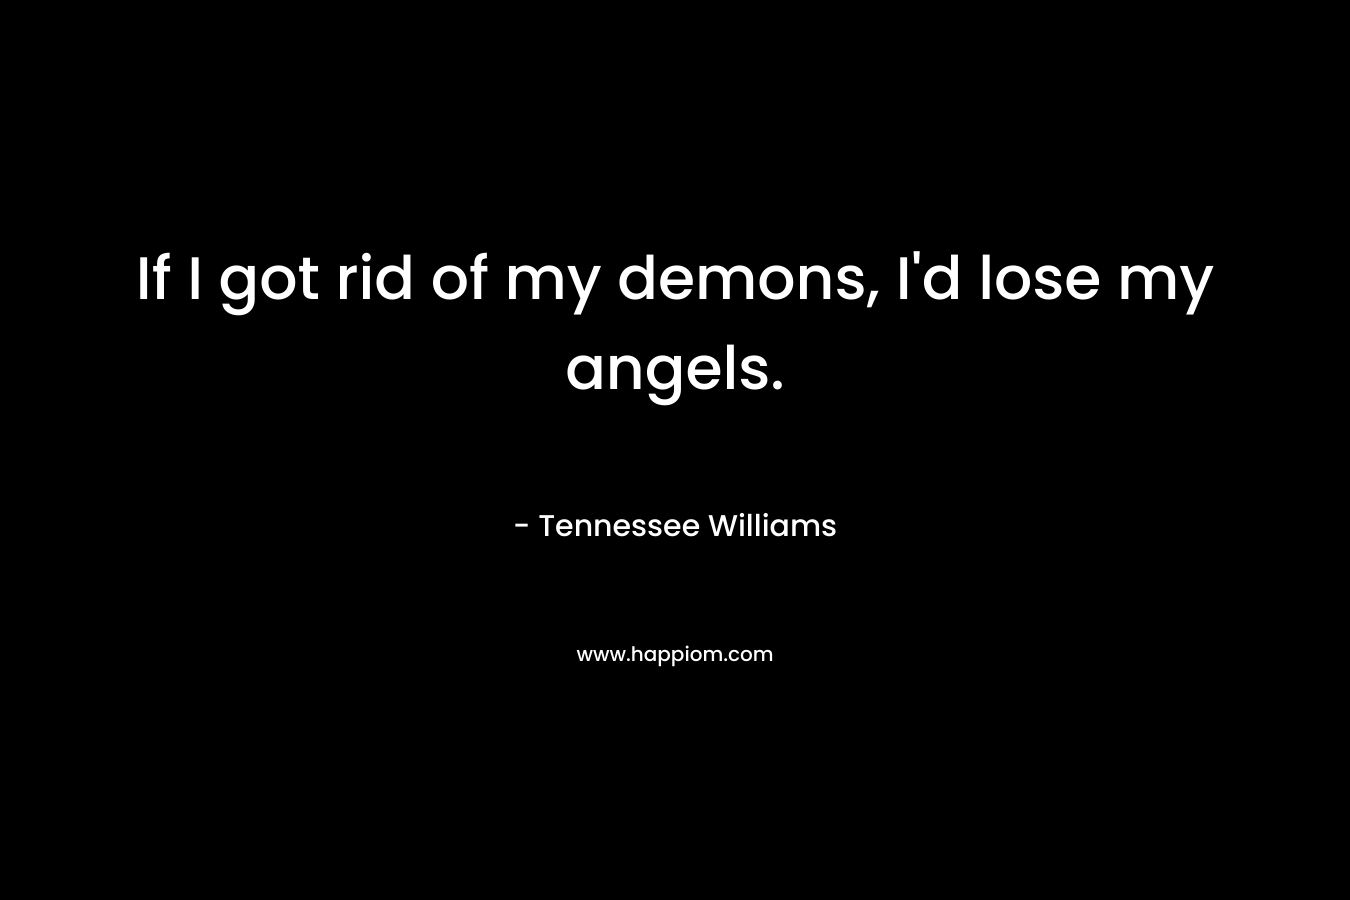 If I got rid of my demons, I’d lose my angels. – Tennessee Williams